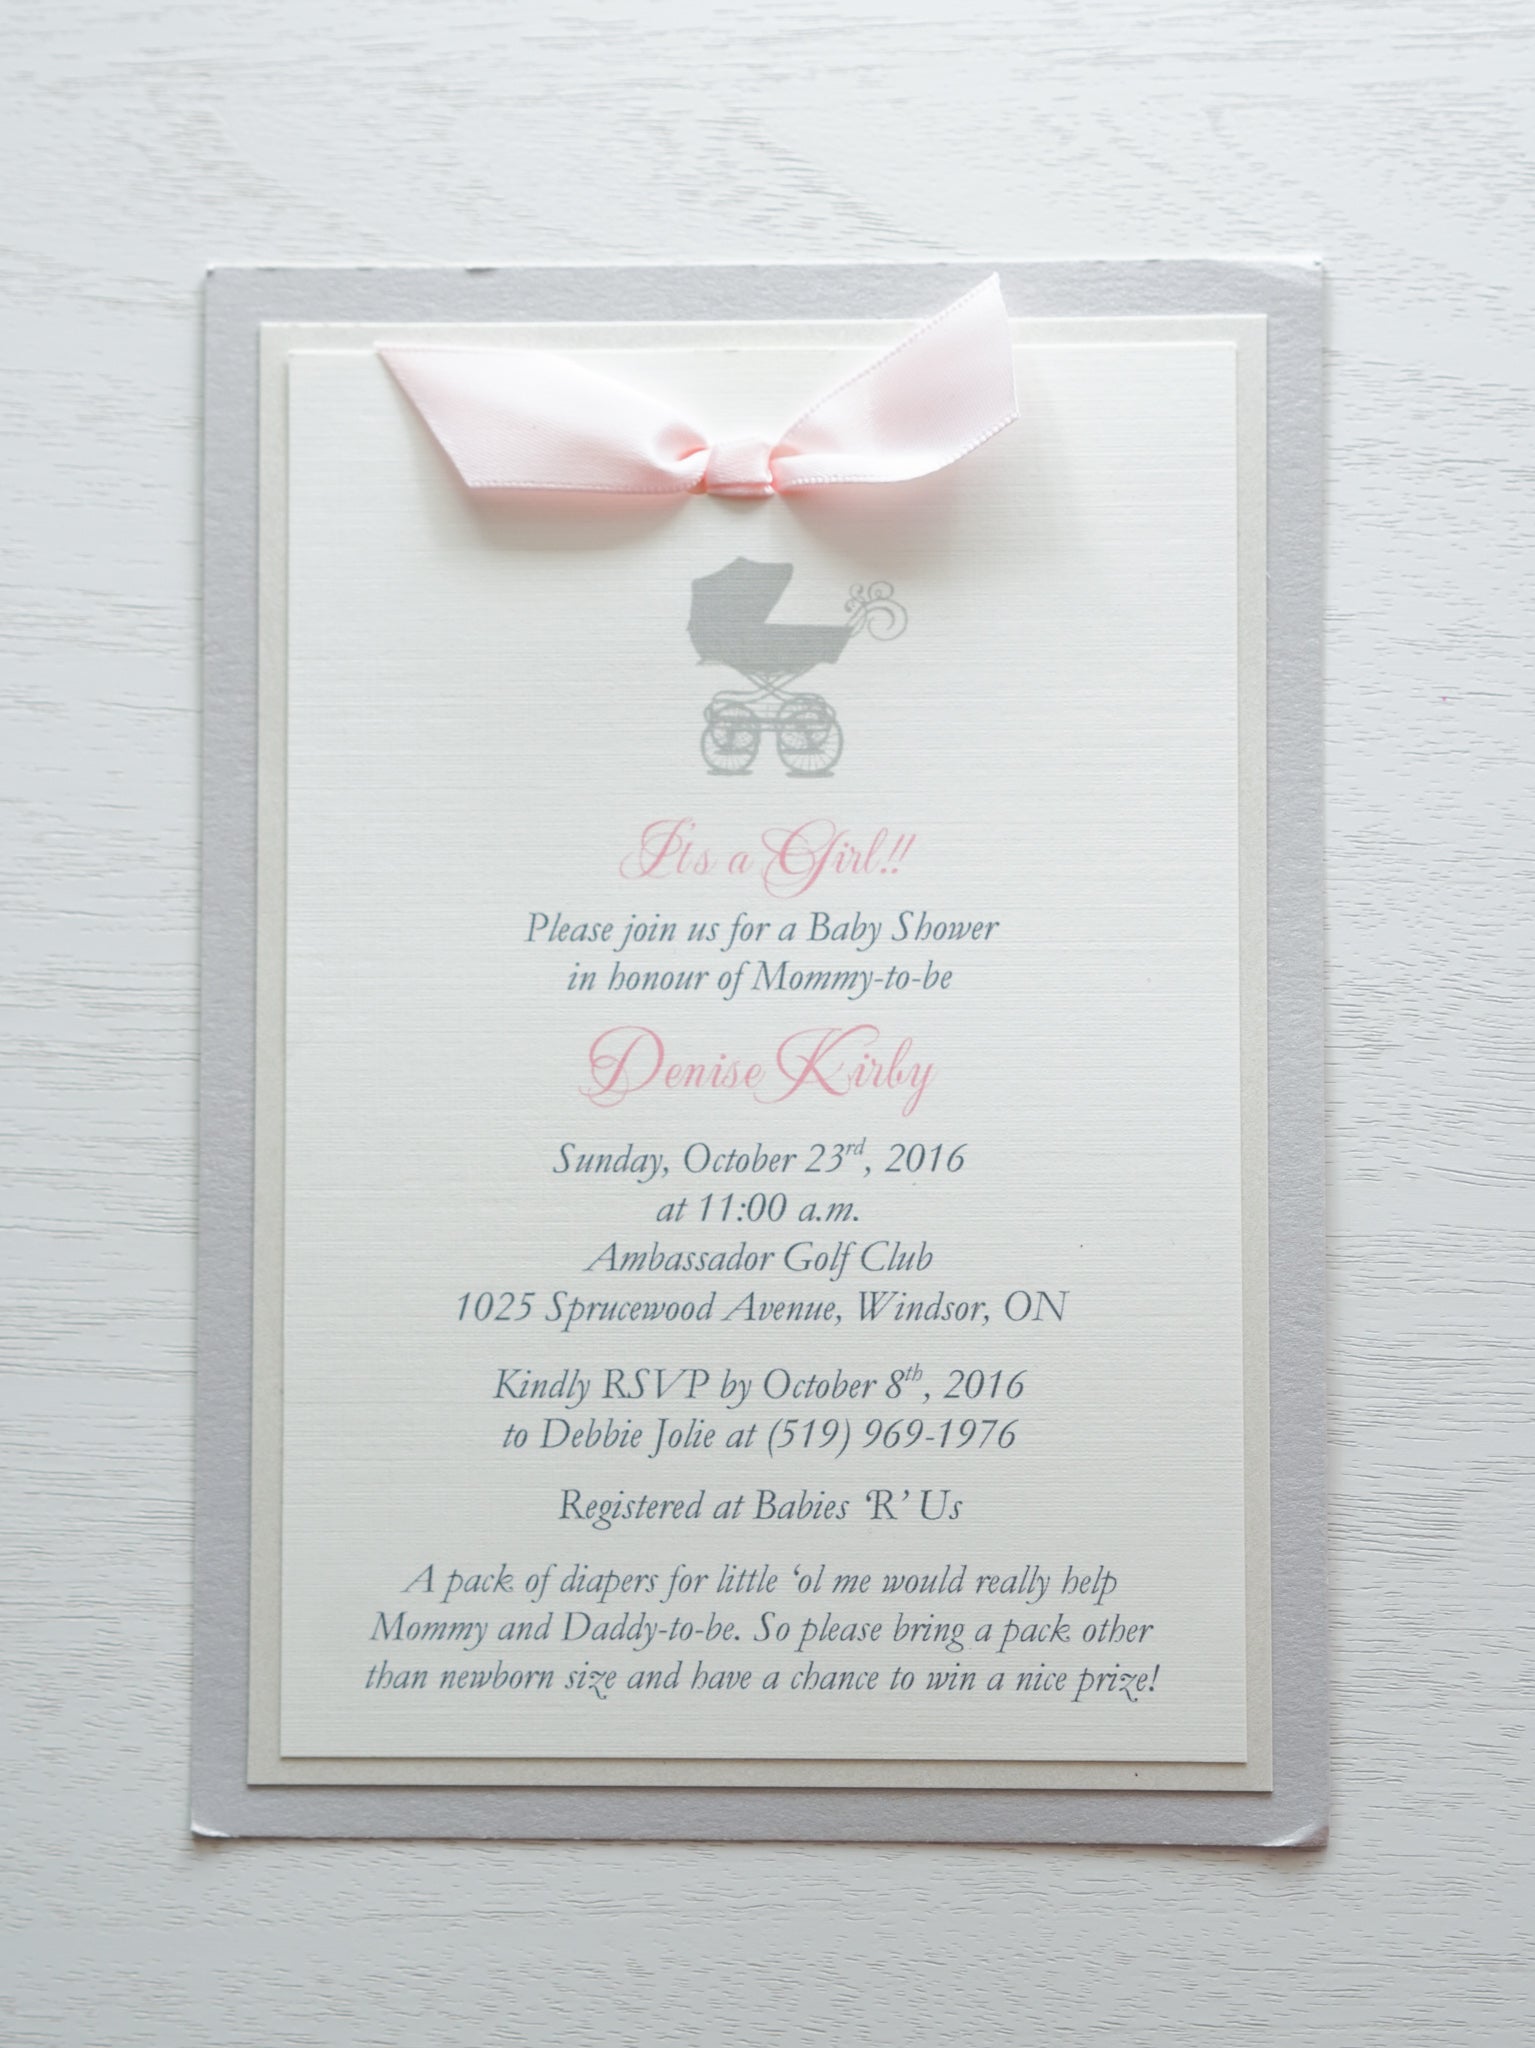 alt=“Classic invitation features ivory linen matte card stock on ivory pearlescent shimmer and grey pearlescent shimmer card stock with a grey pram and a rich pink satin ribbon bow detail”